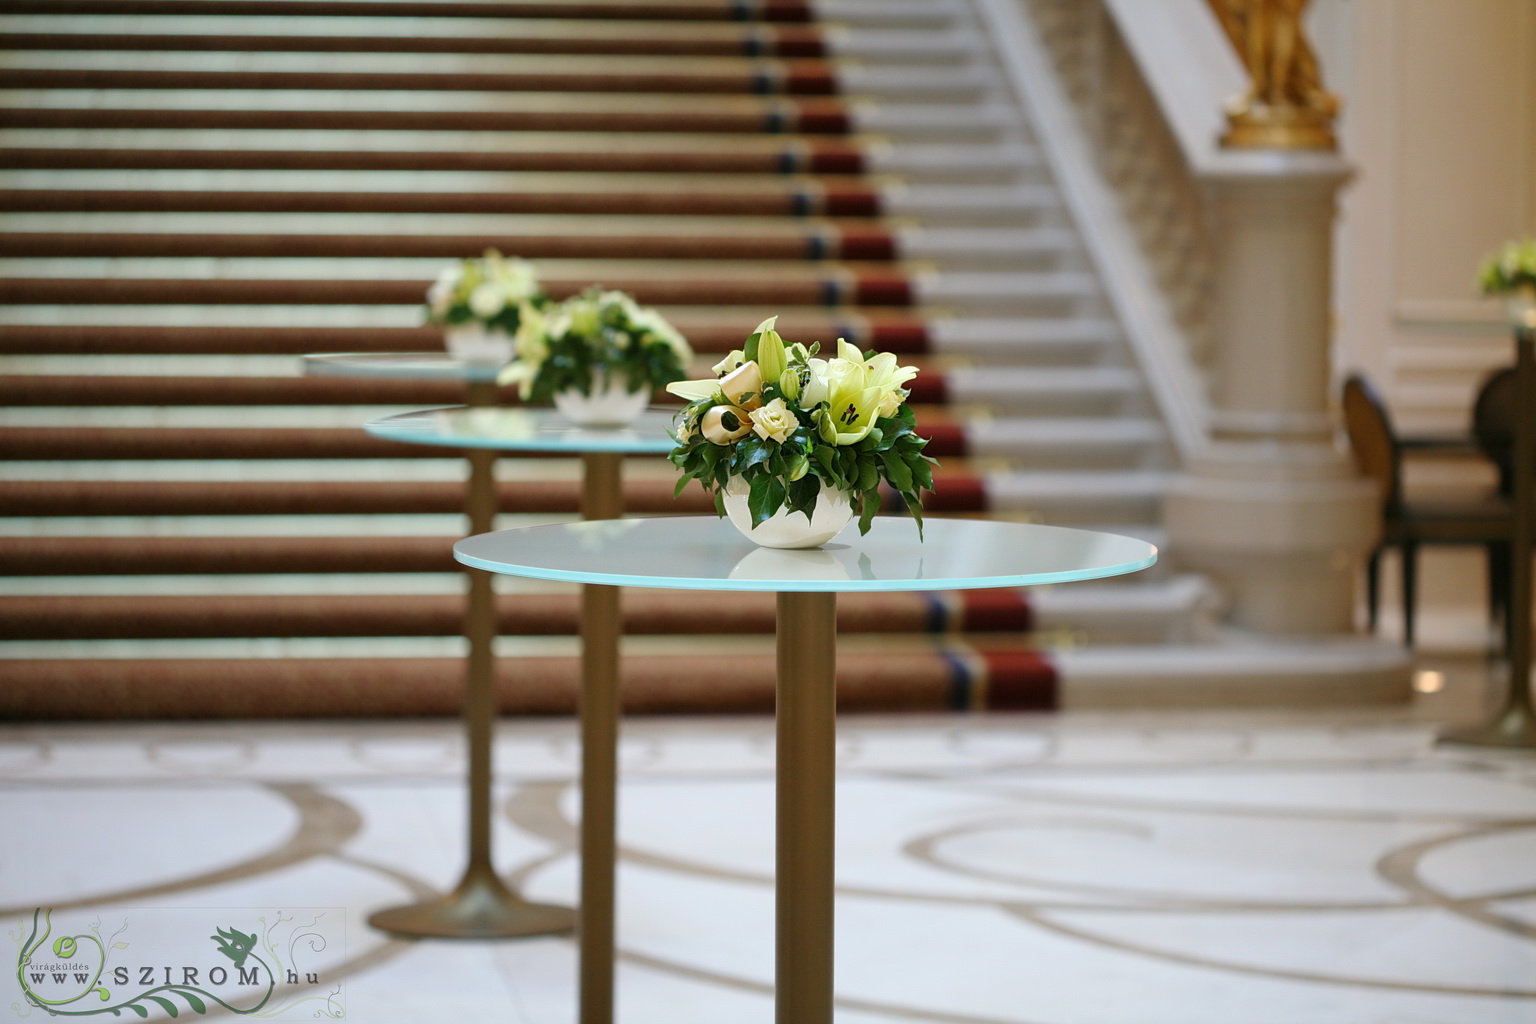 flower delivery Budapest - Lily centerpiece, 1pc, Corinthia Hotel Budapest (lisianthus, Asiatic lilies, cream), wedding